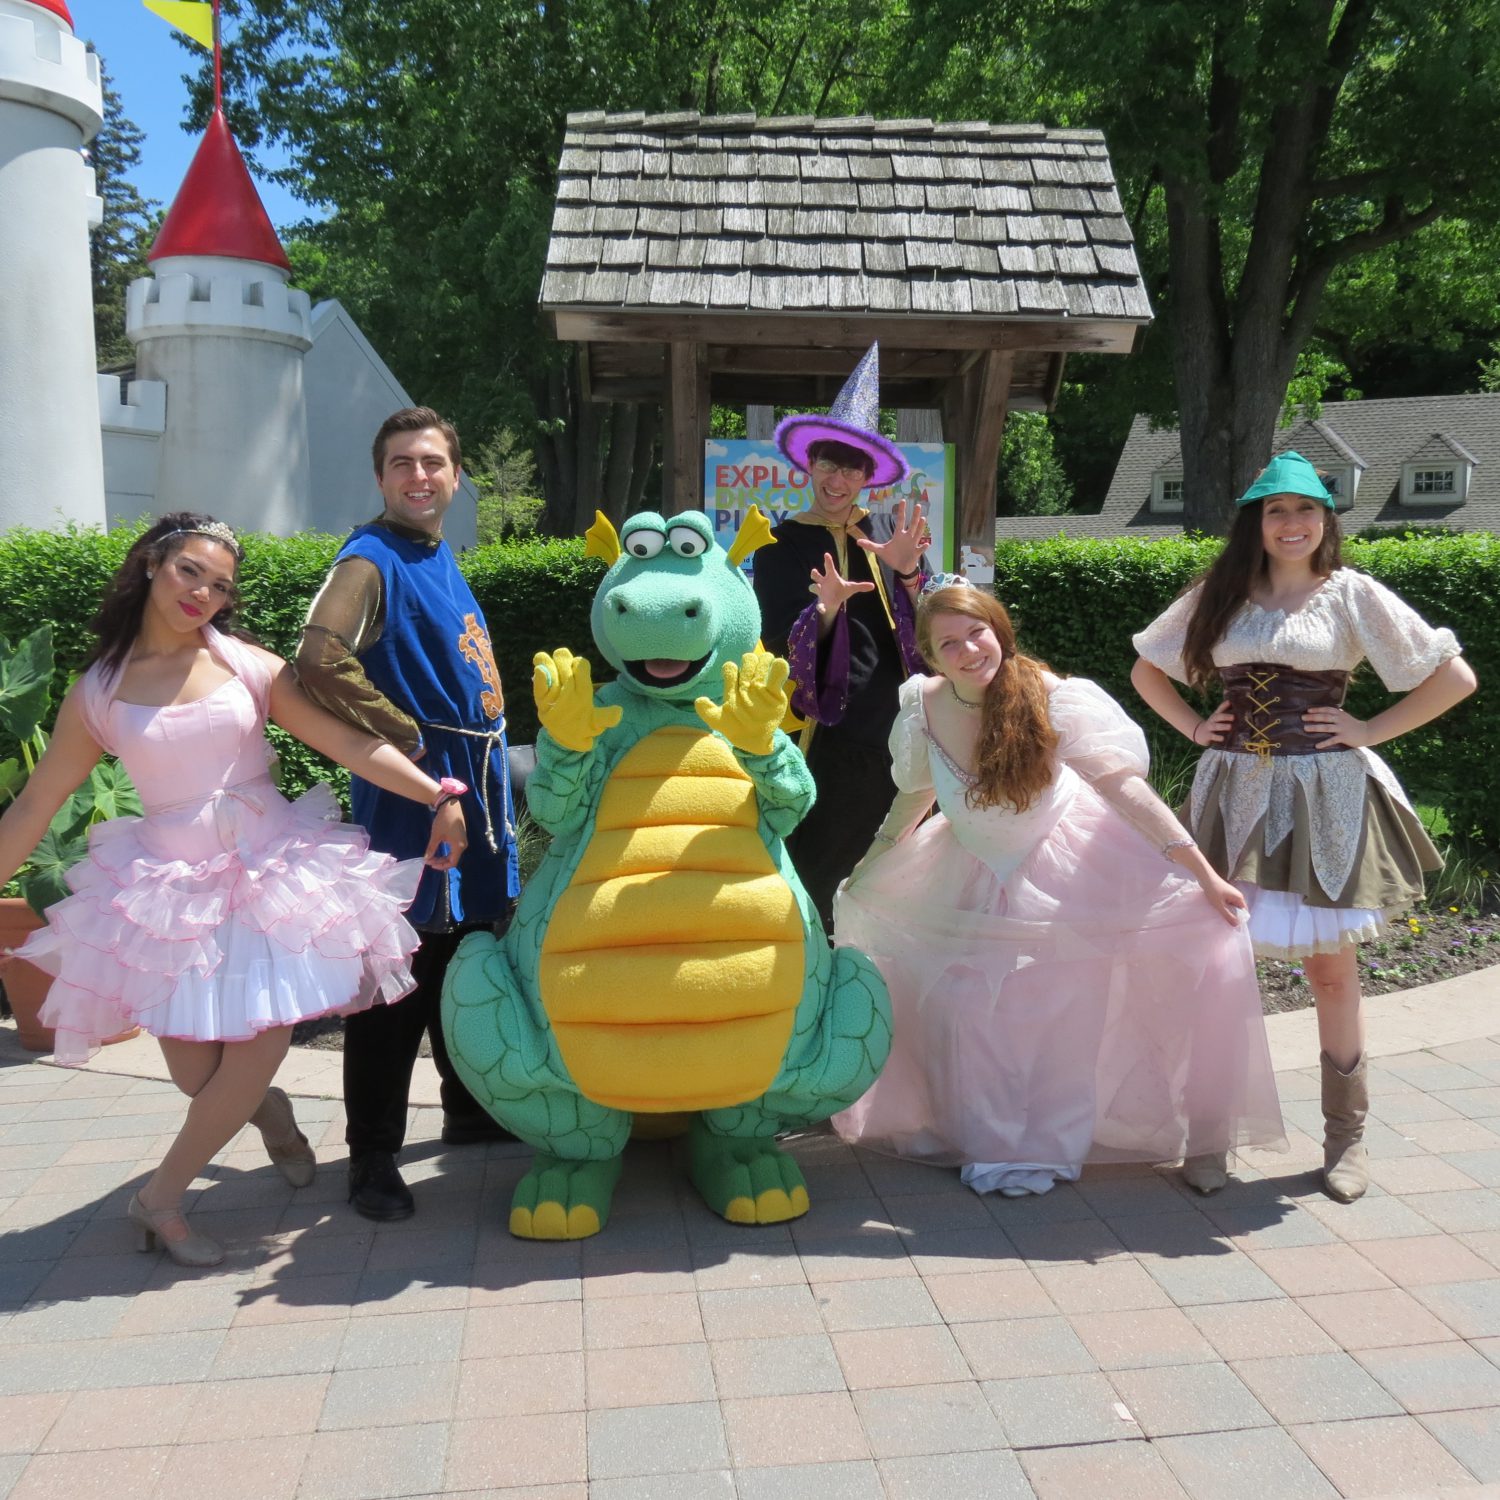 Park staff in costumes in front of castle entrance and sign